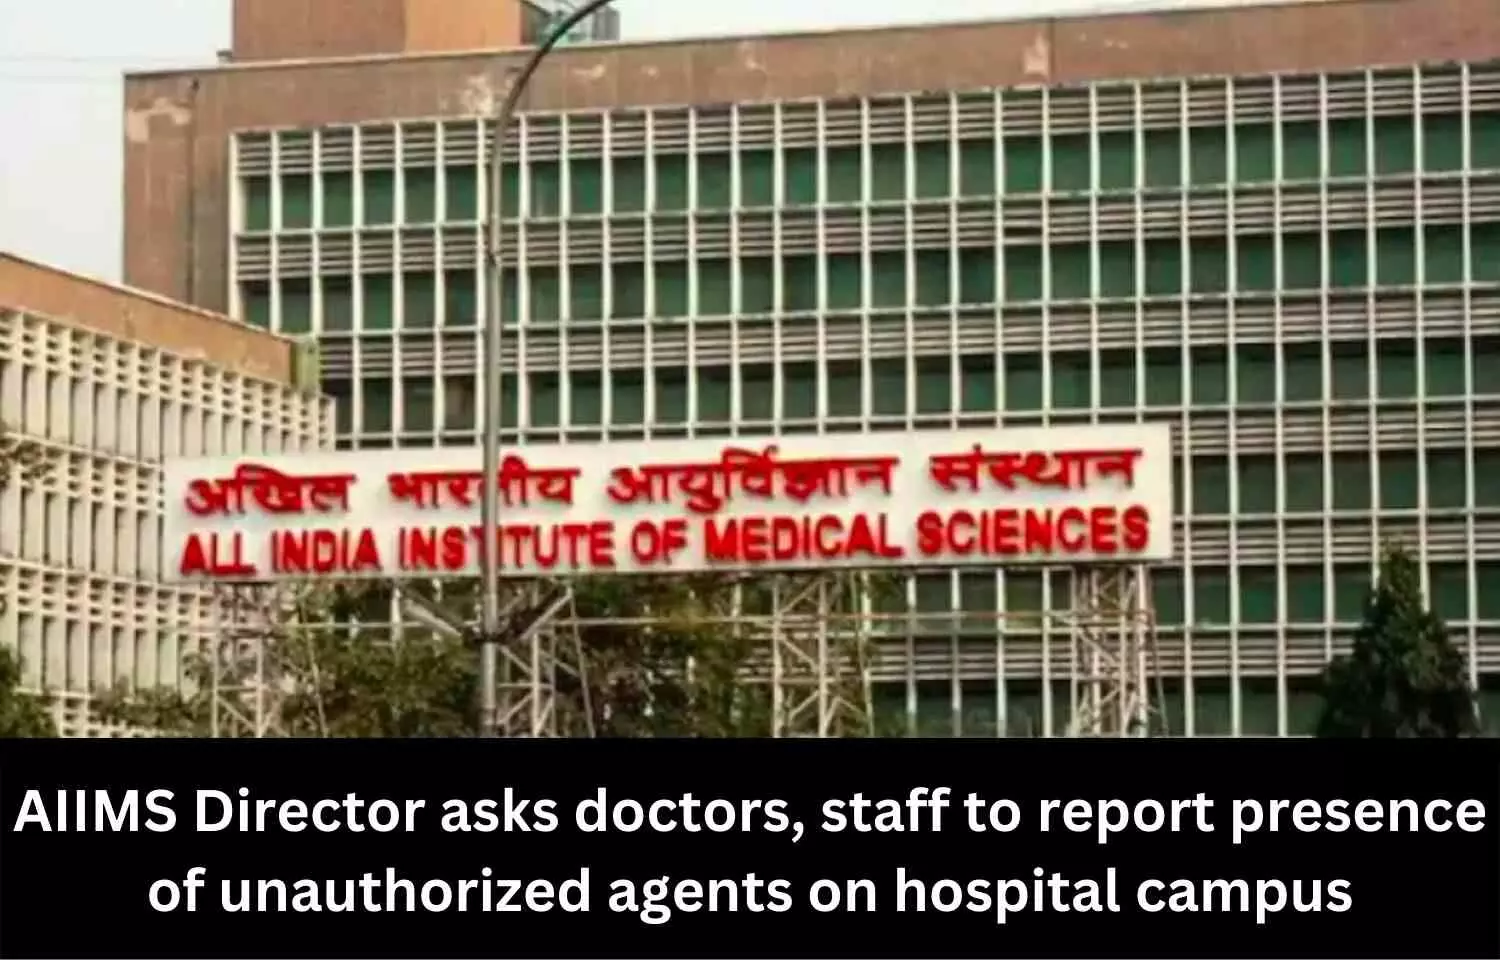 AIIMS Director asks doctors, staff to report presence of unauthorized agents on hospital campus